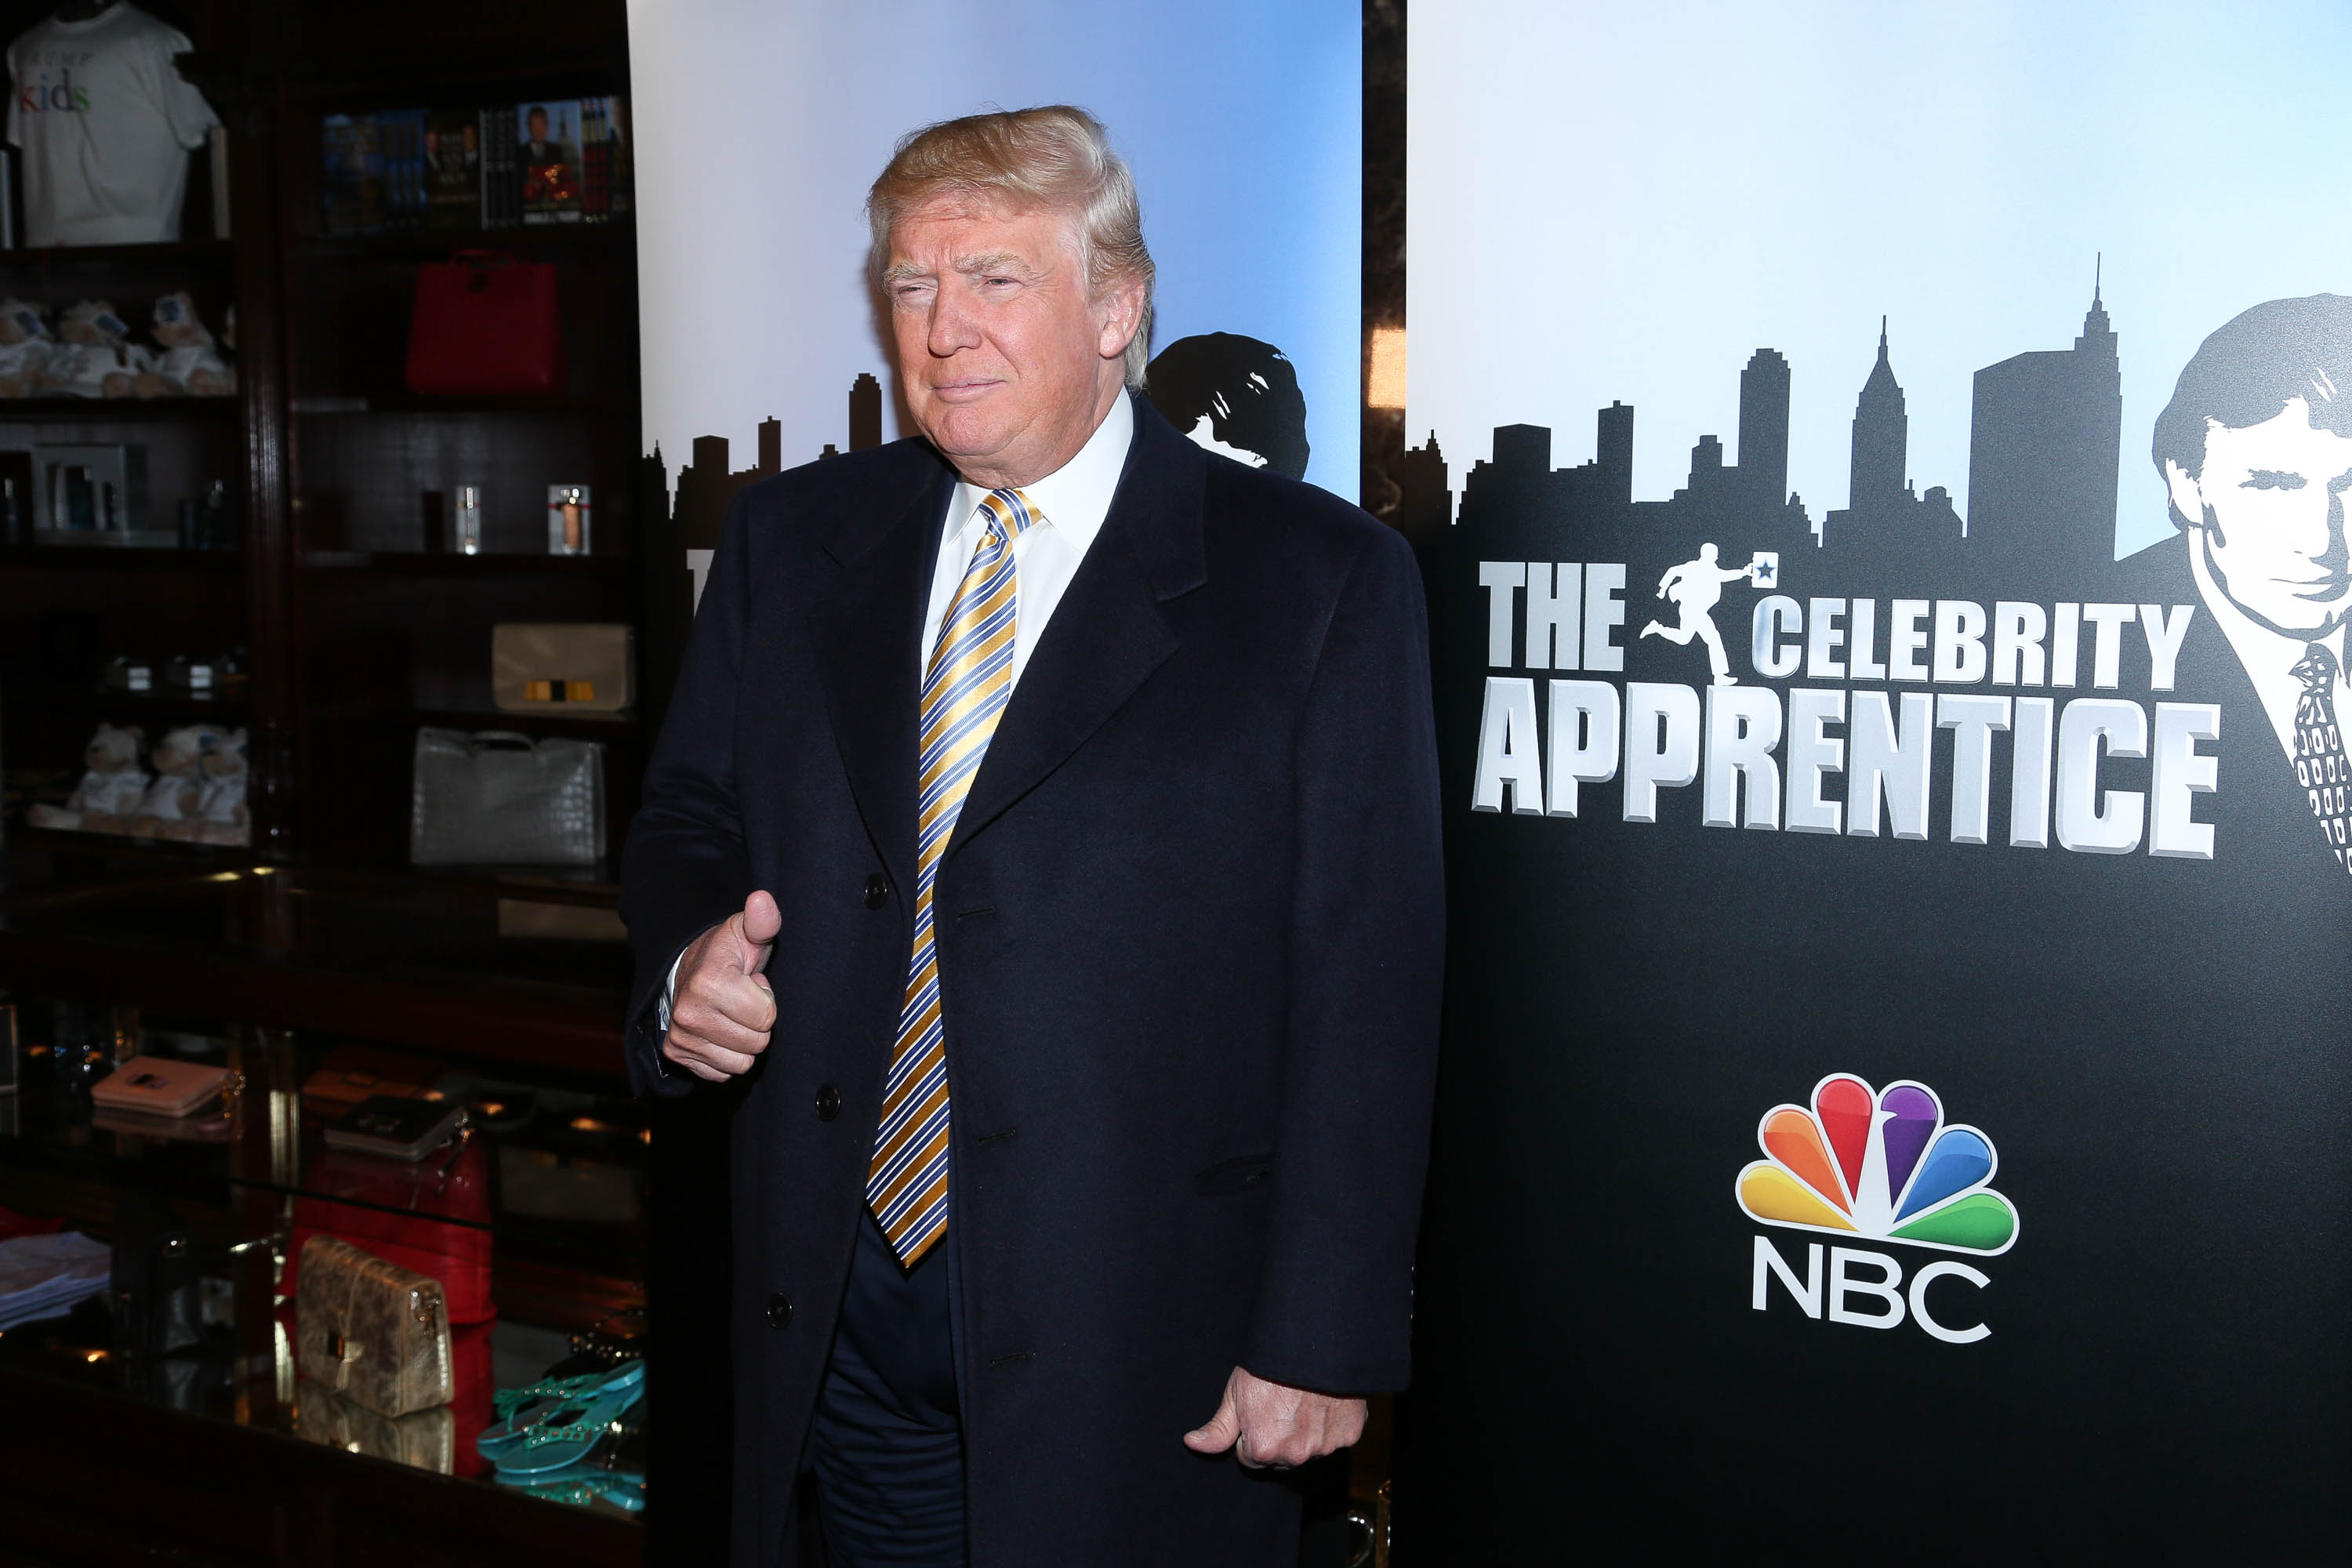 ‘The Apprentice’ Movie Investor Furious Over Portrayal Of Trump: Report